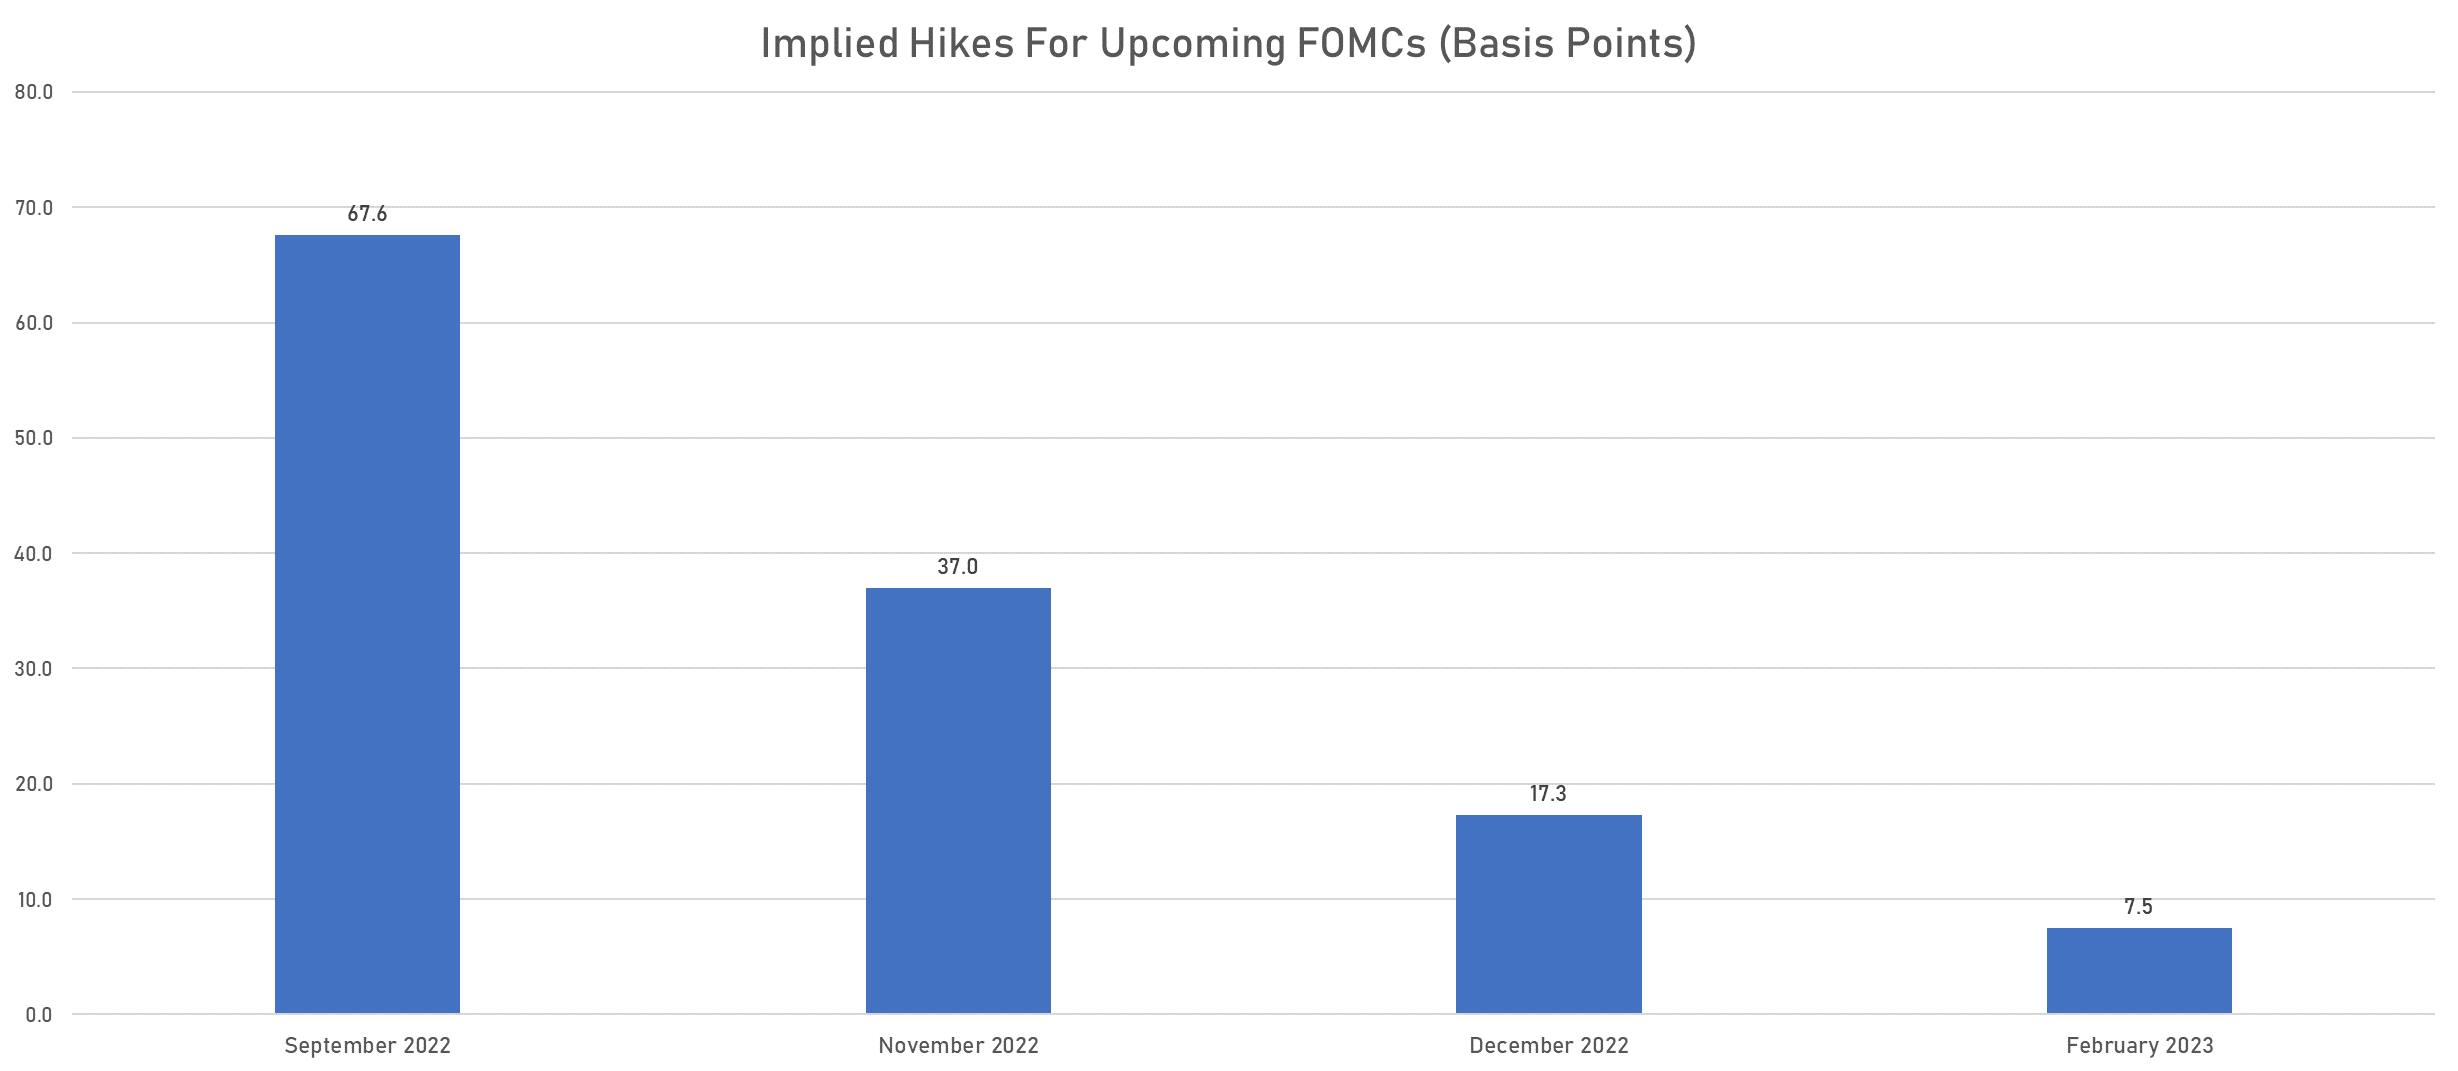 Implied Hikes At Upcoming FOMCs | Sources: phipost.com, Refinitiv data